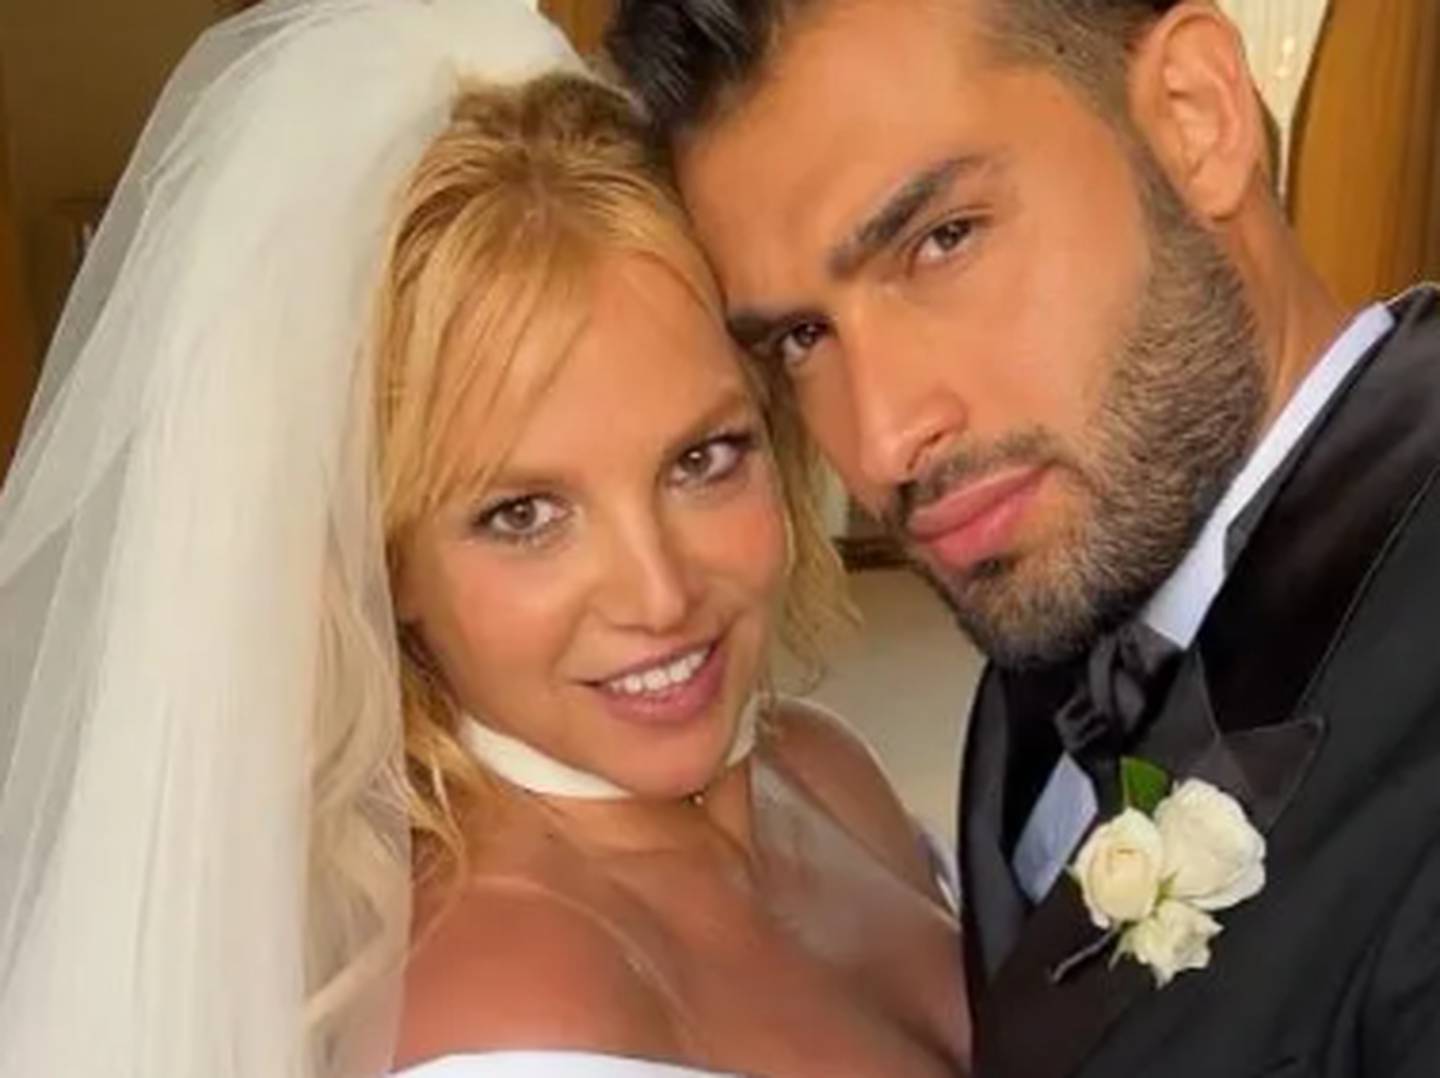 Britney Spears wore a Versace gown and Charlotte Tilbury make-up for her wedding to Sam Asghari. Photo: Charlotte Tilbury